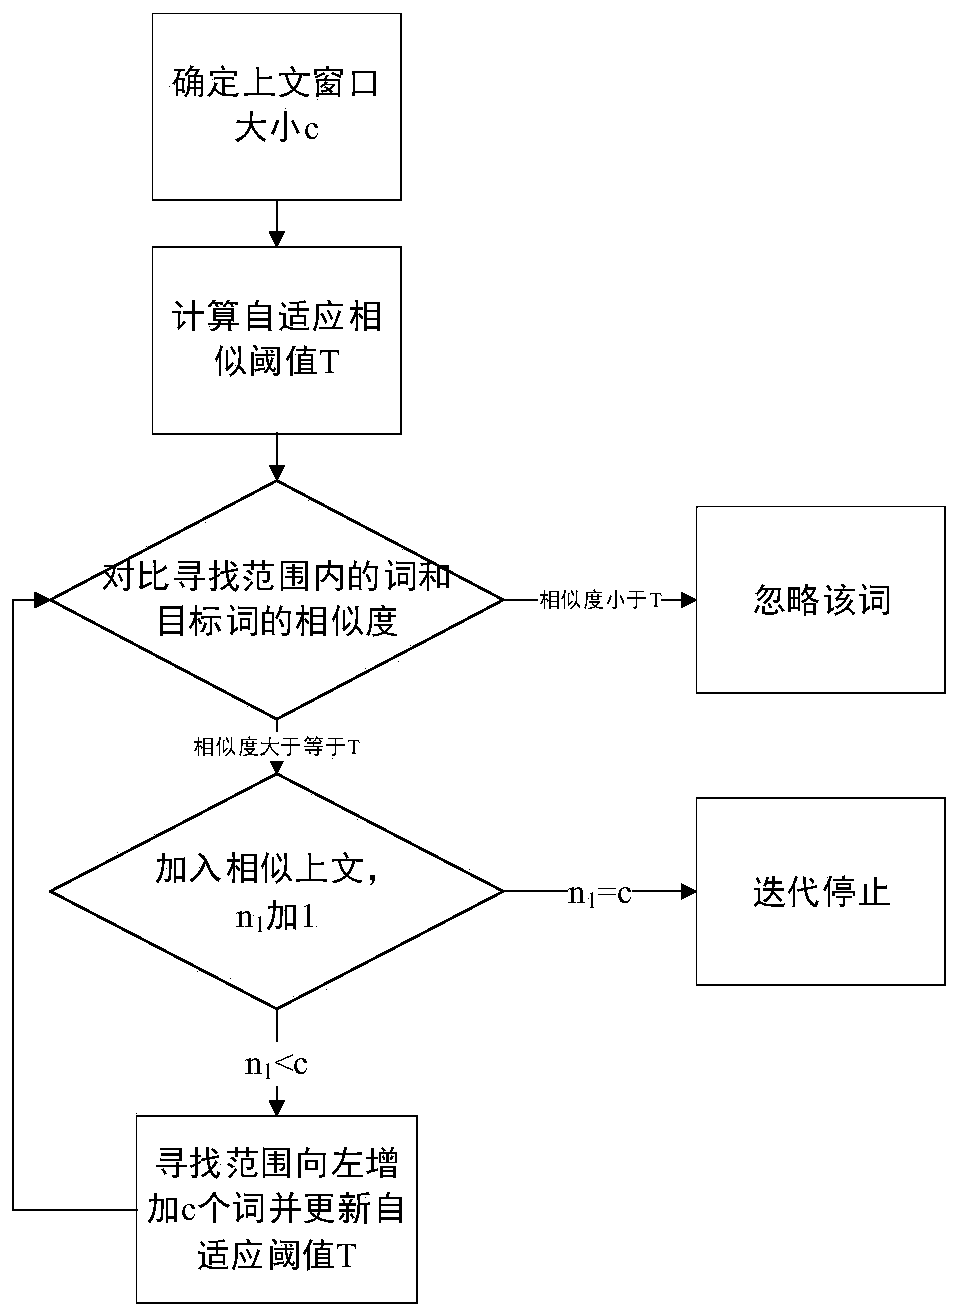 Chinese word vector generation method based on similar contexts and reinforcement learning